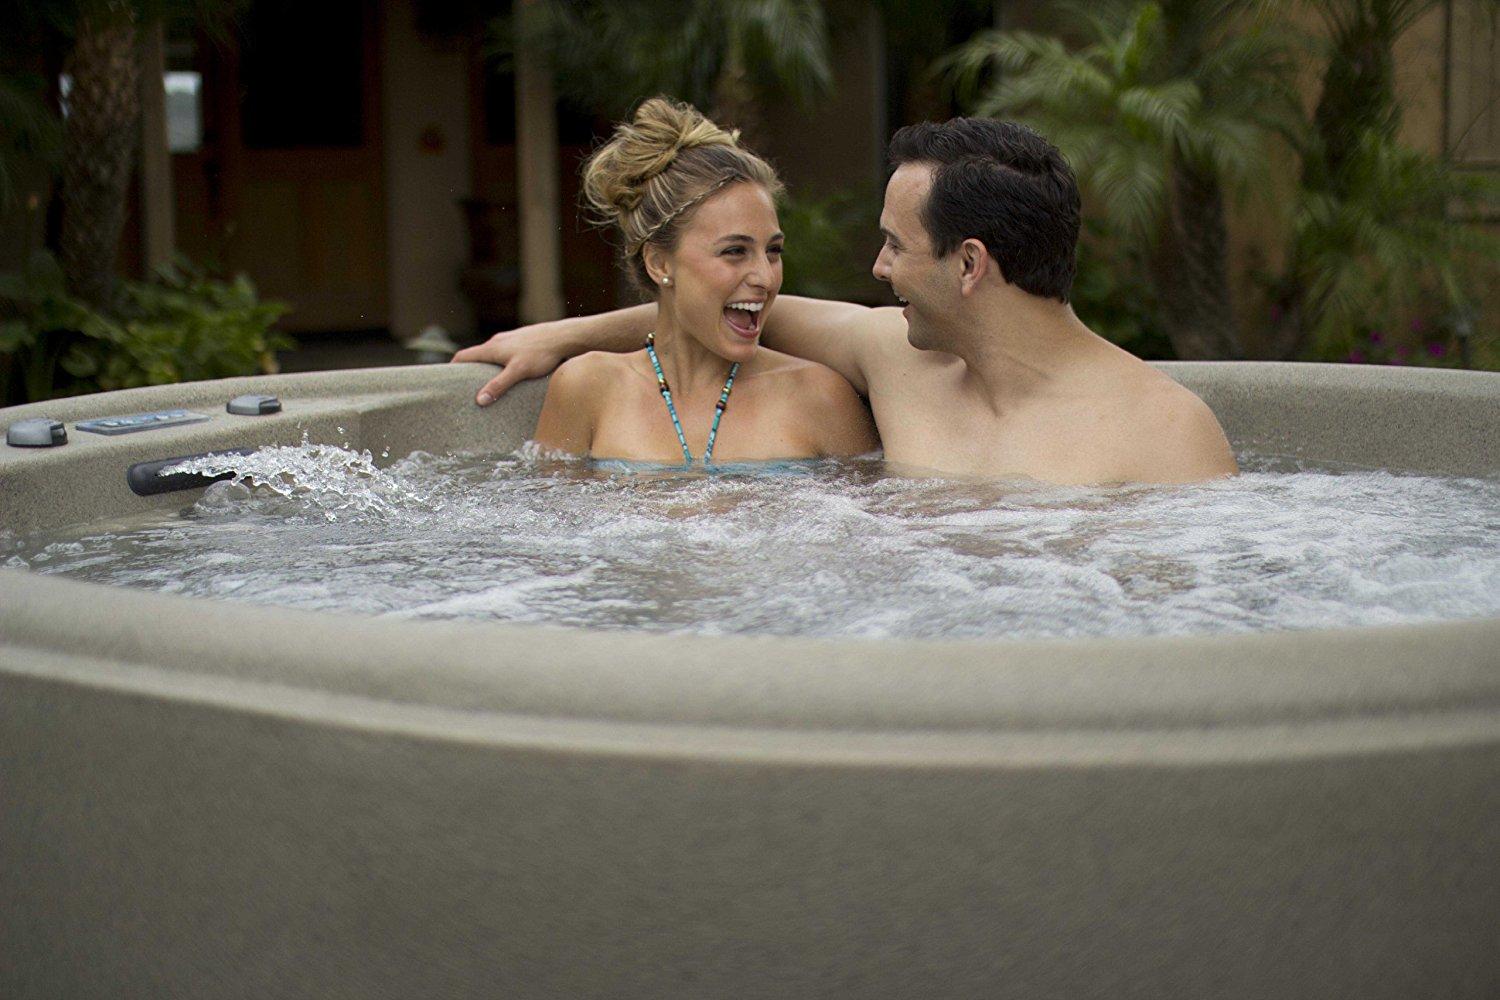 Review Of Lifesmart Rock Solid Luna Spa Hot Tub With Plug And Play Operation